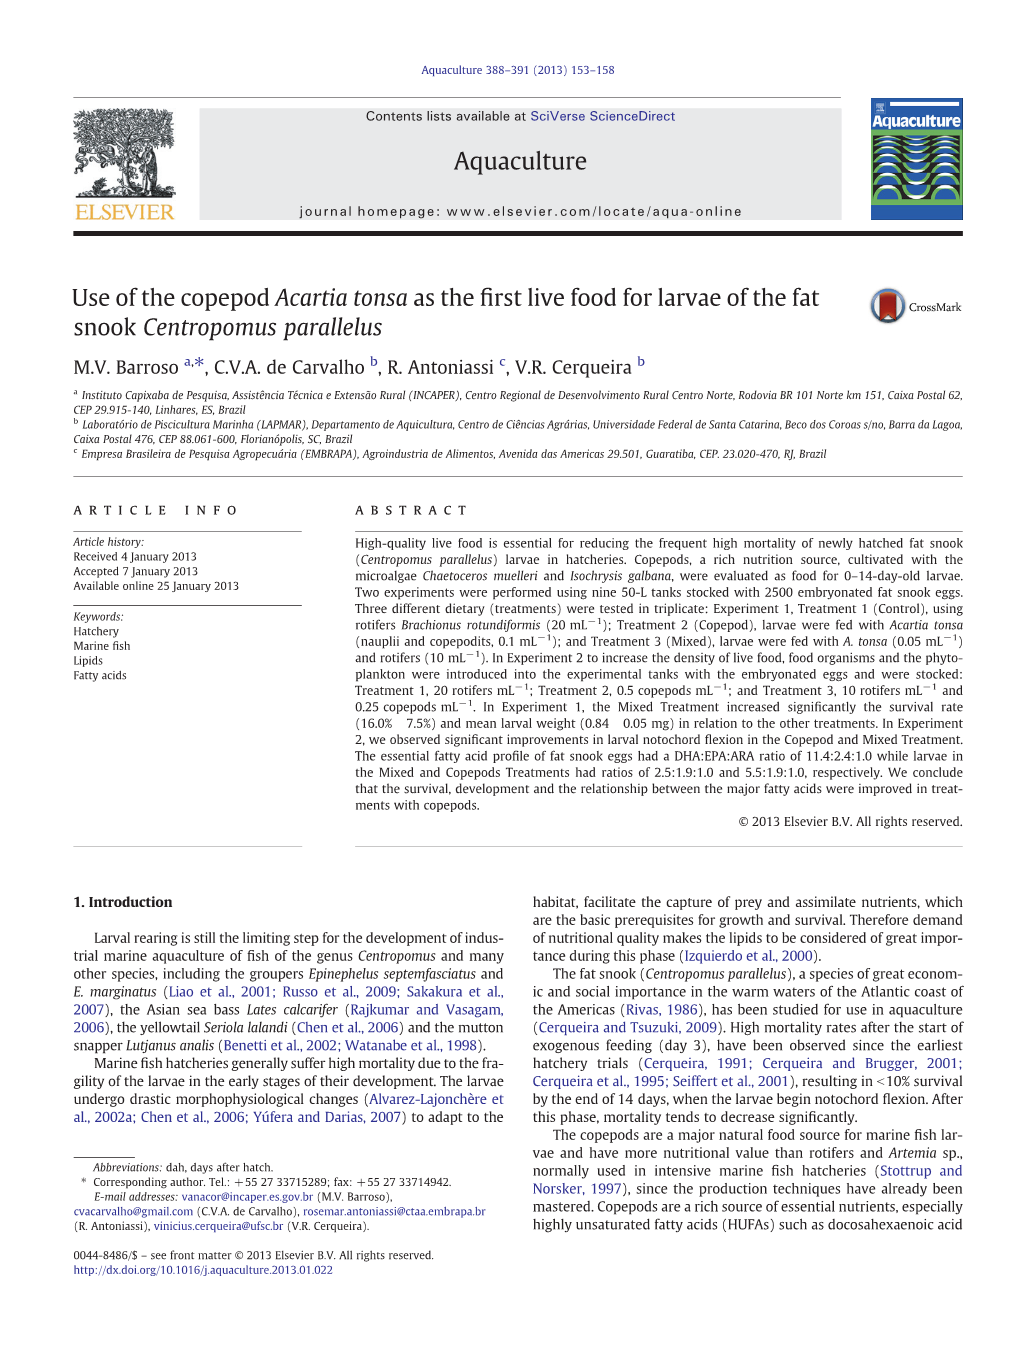 Use of the Copepod Acartia Tonsa As the First Live Food for Larvae of the Fat